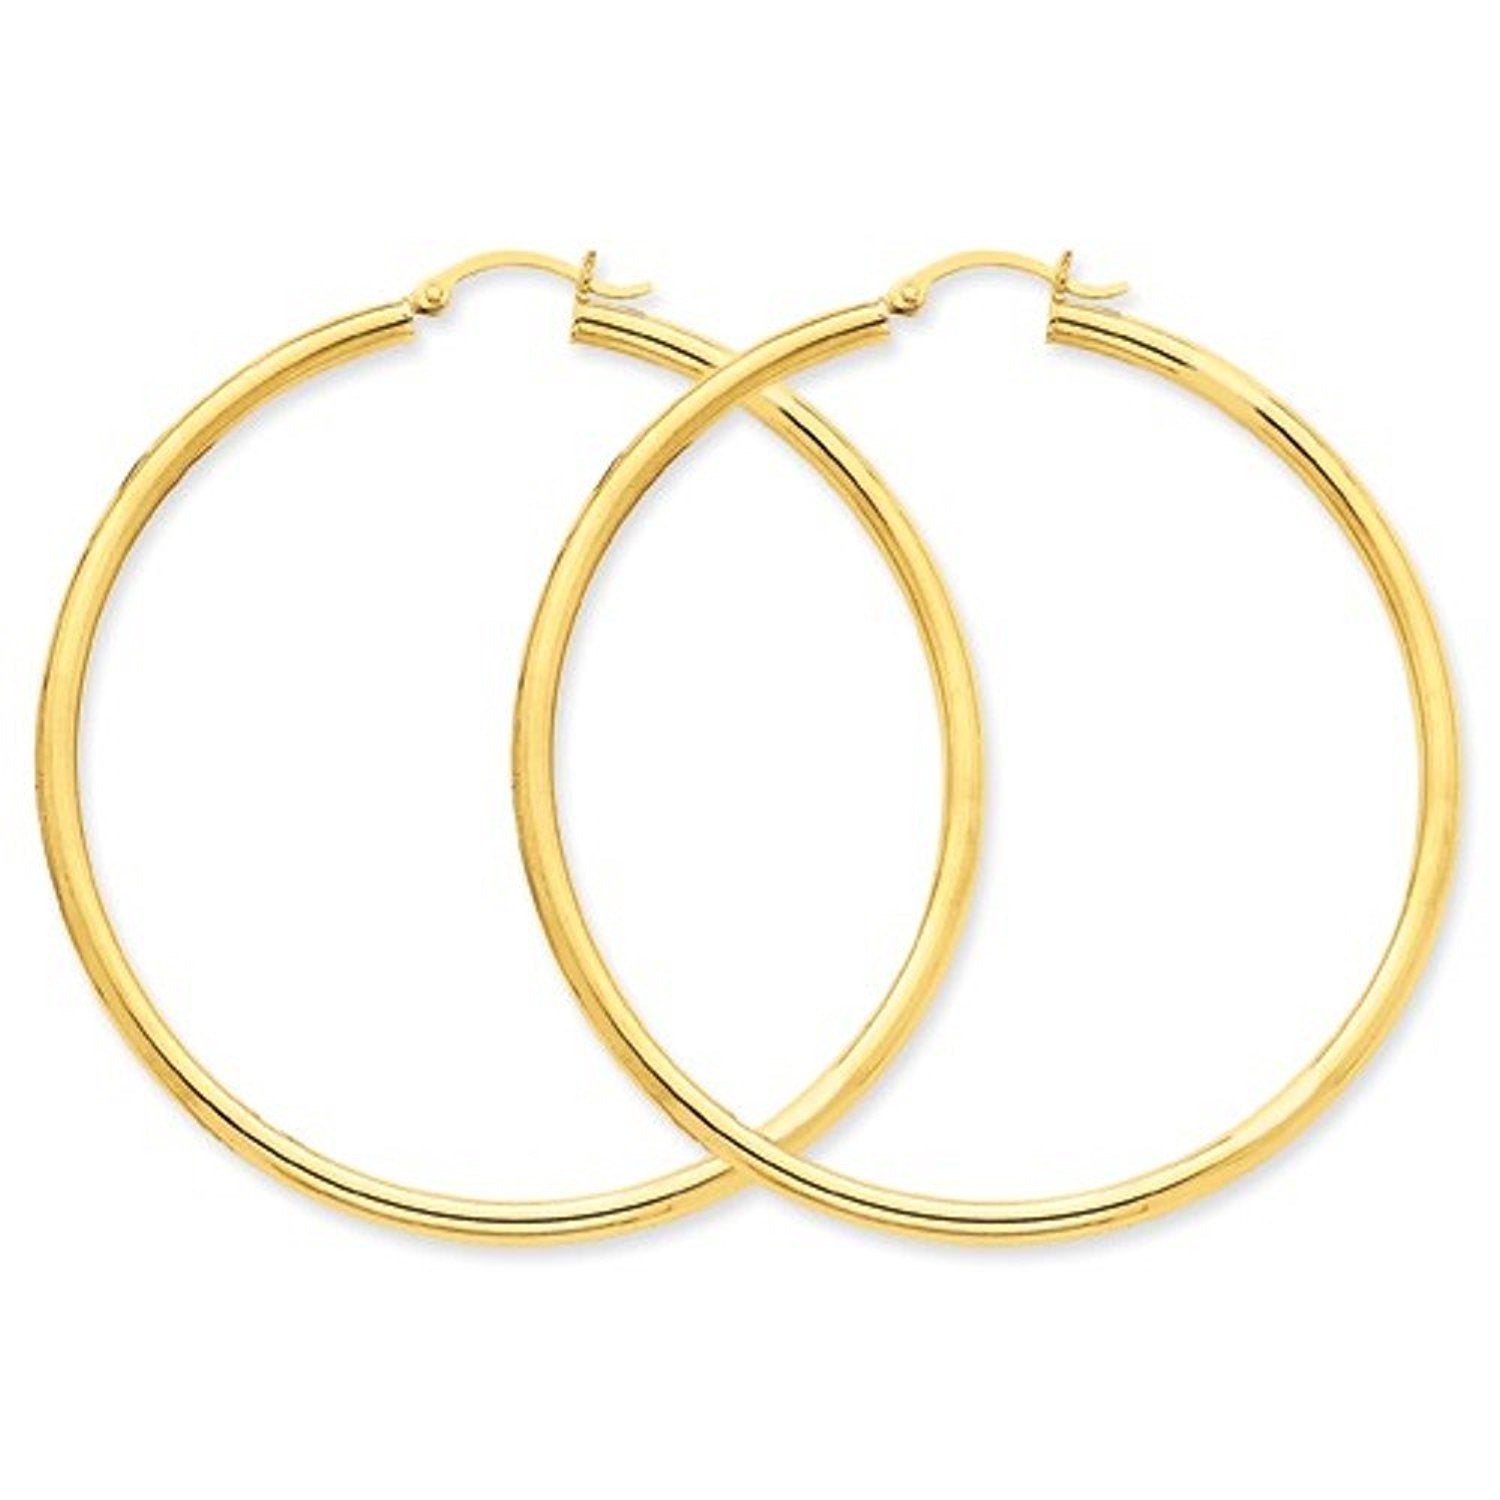 14k Yellow Gold Classic Round Large Hoop Earrings 58mm x 3mm Lightweight